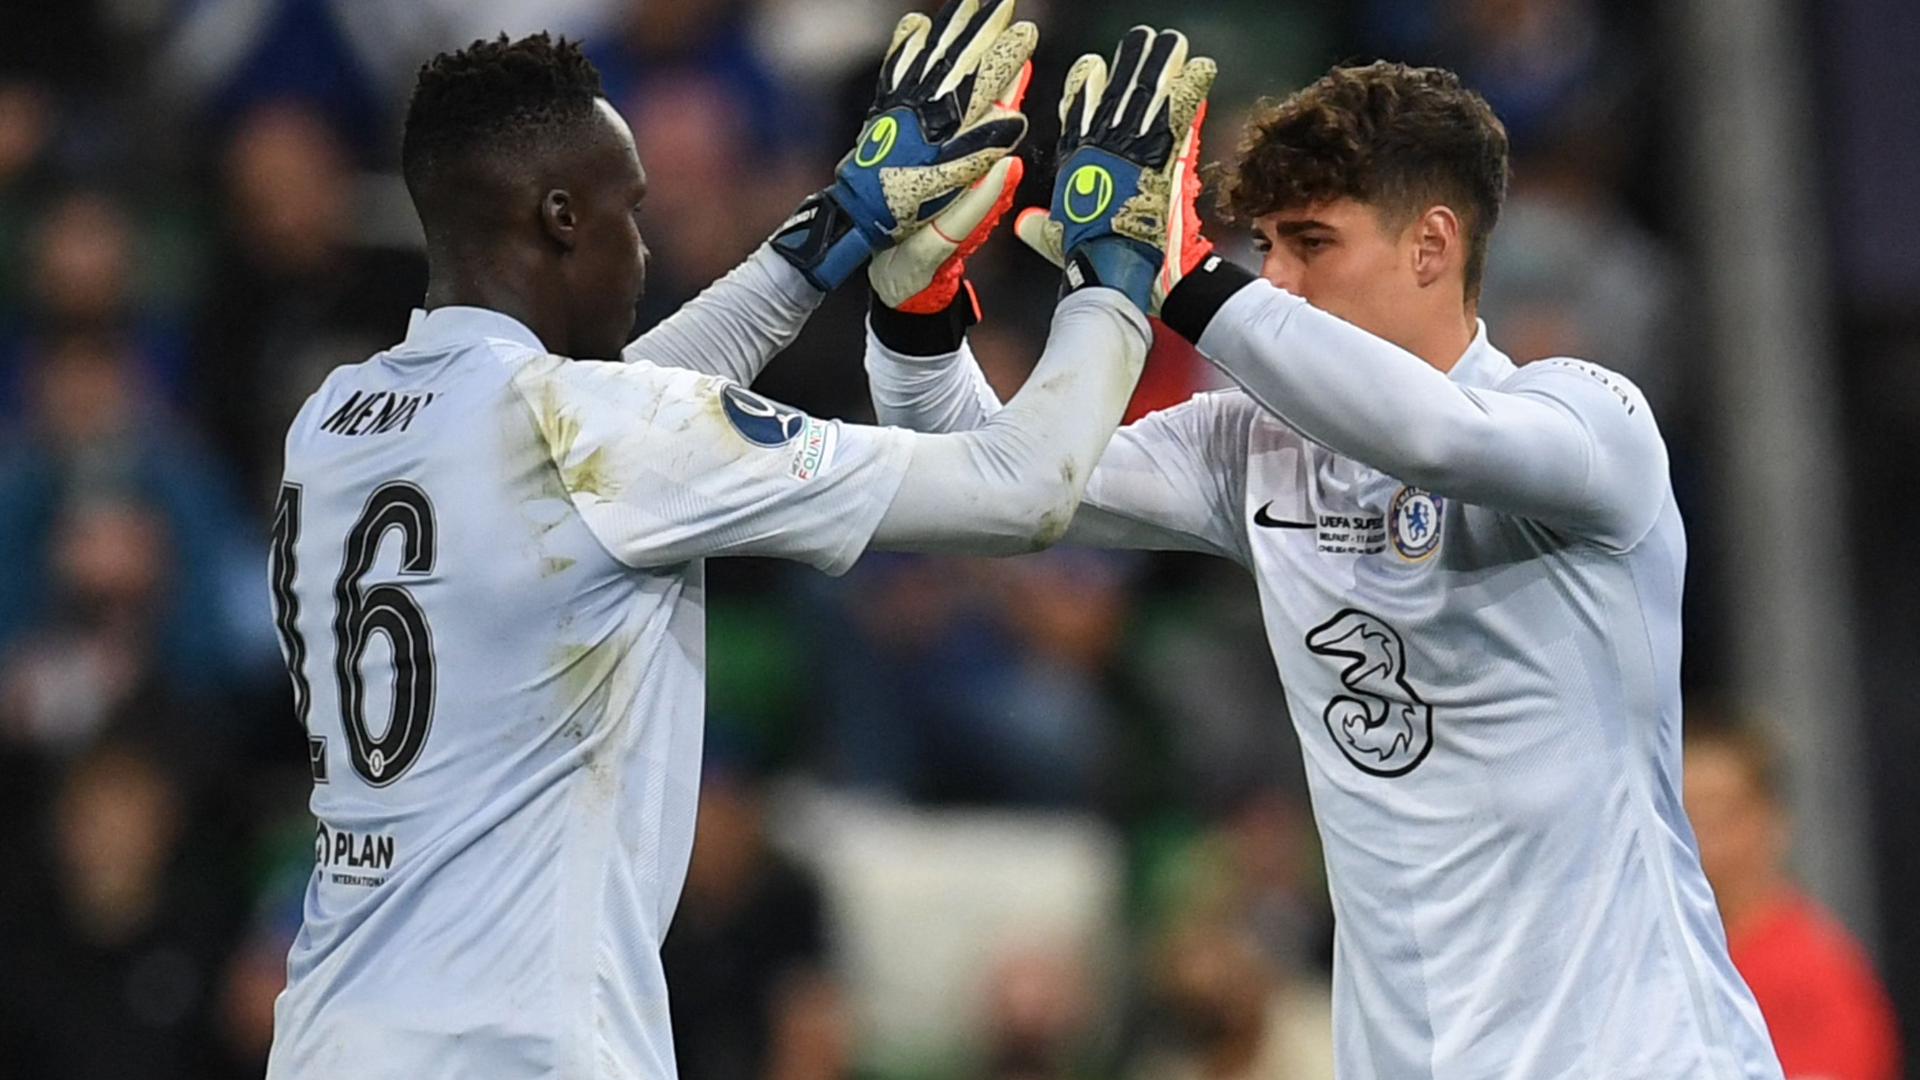 Mendy was happy to make way for Kepa in UEFA Super Cup penalty shootout, says Chelsea boss Tuchel | Goal.com